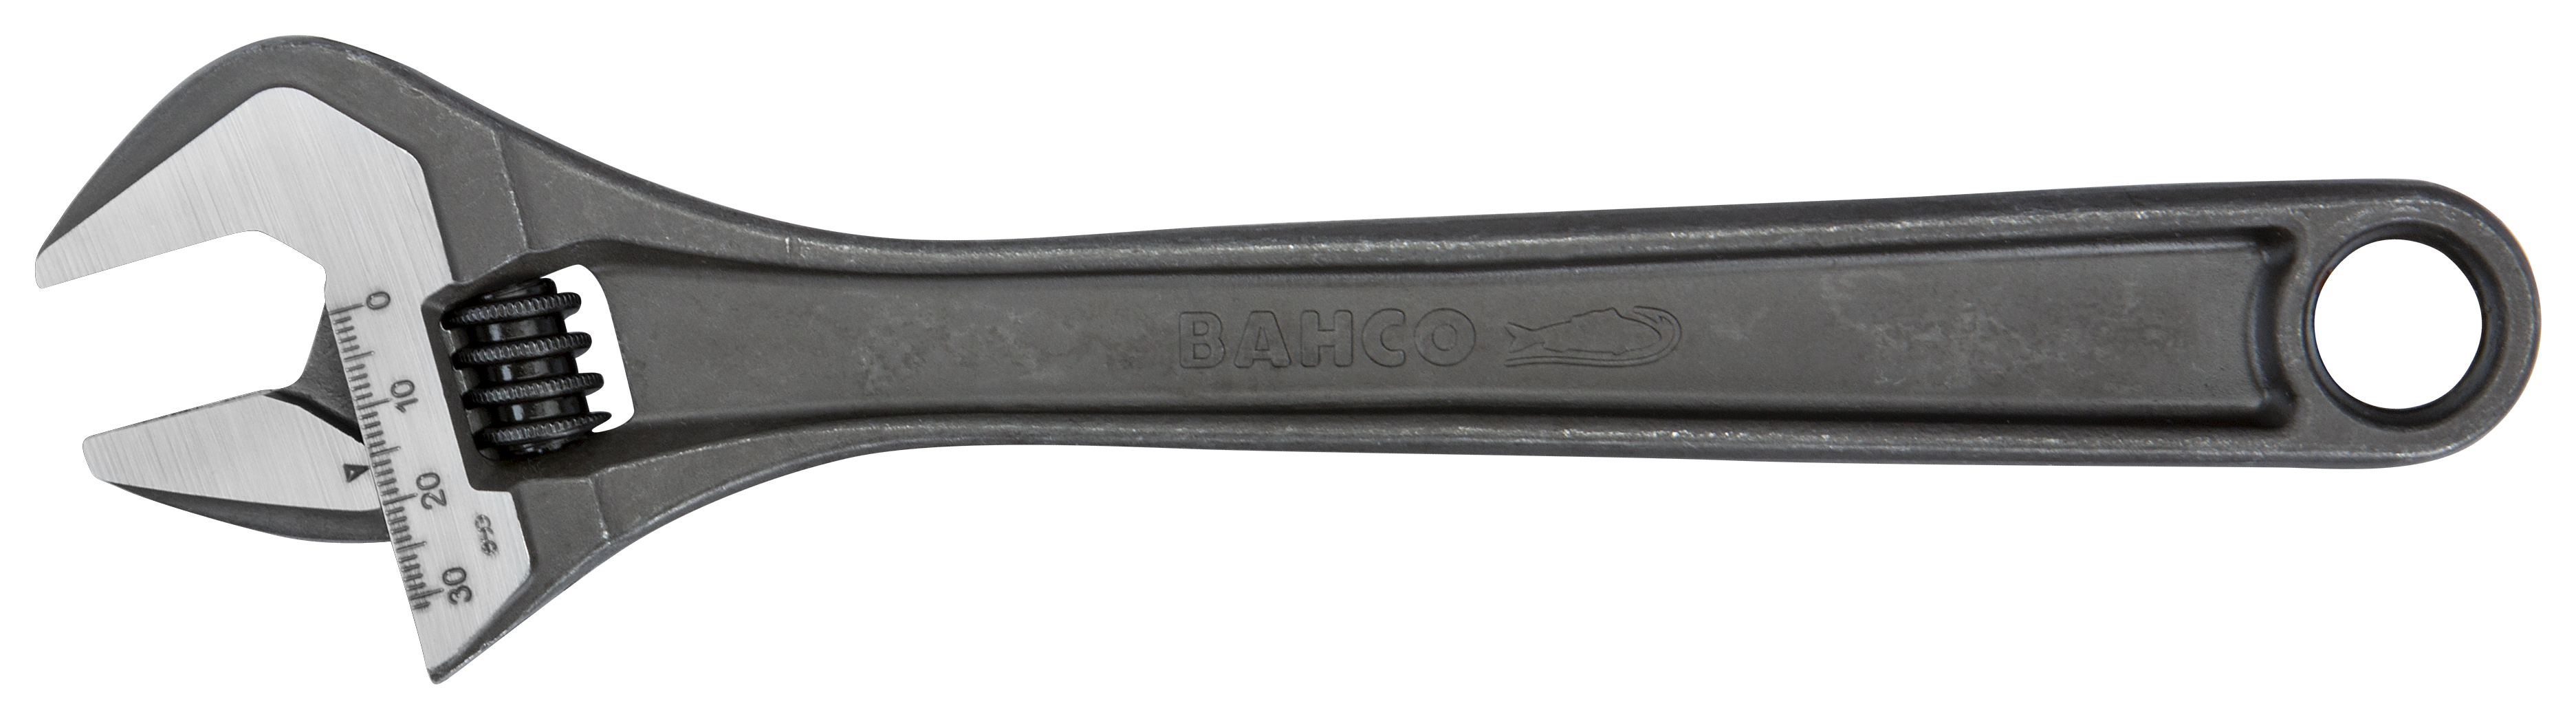 Image of Bahco BAH8072 Adjustable Wrench - 10in / 254mm